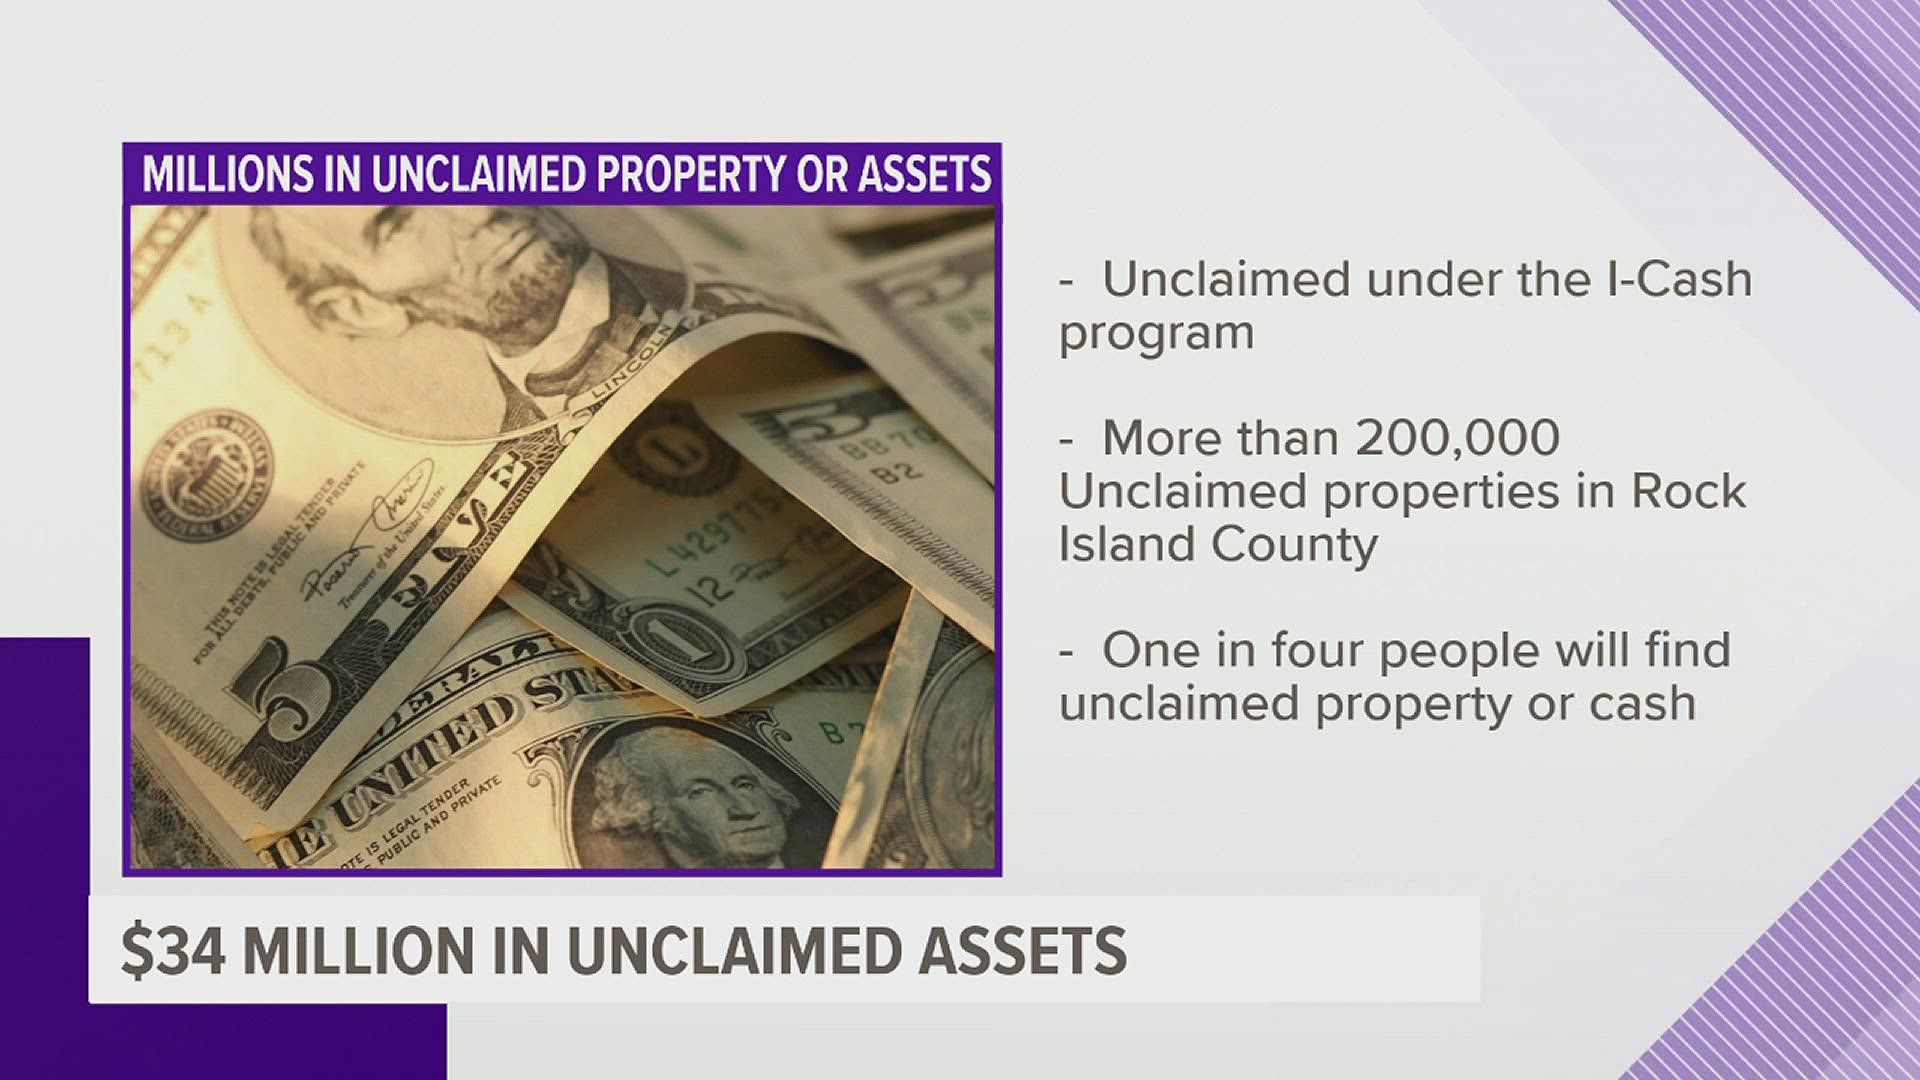 The treasurer says that one in four RICO residents are able to secure unclaimed assets, among millions of dollars and more than 200,000 properties.